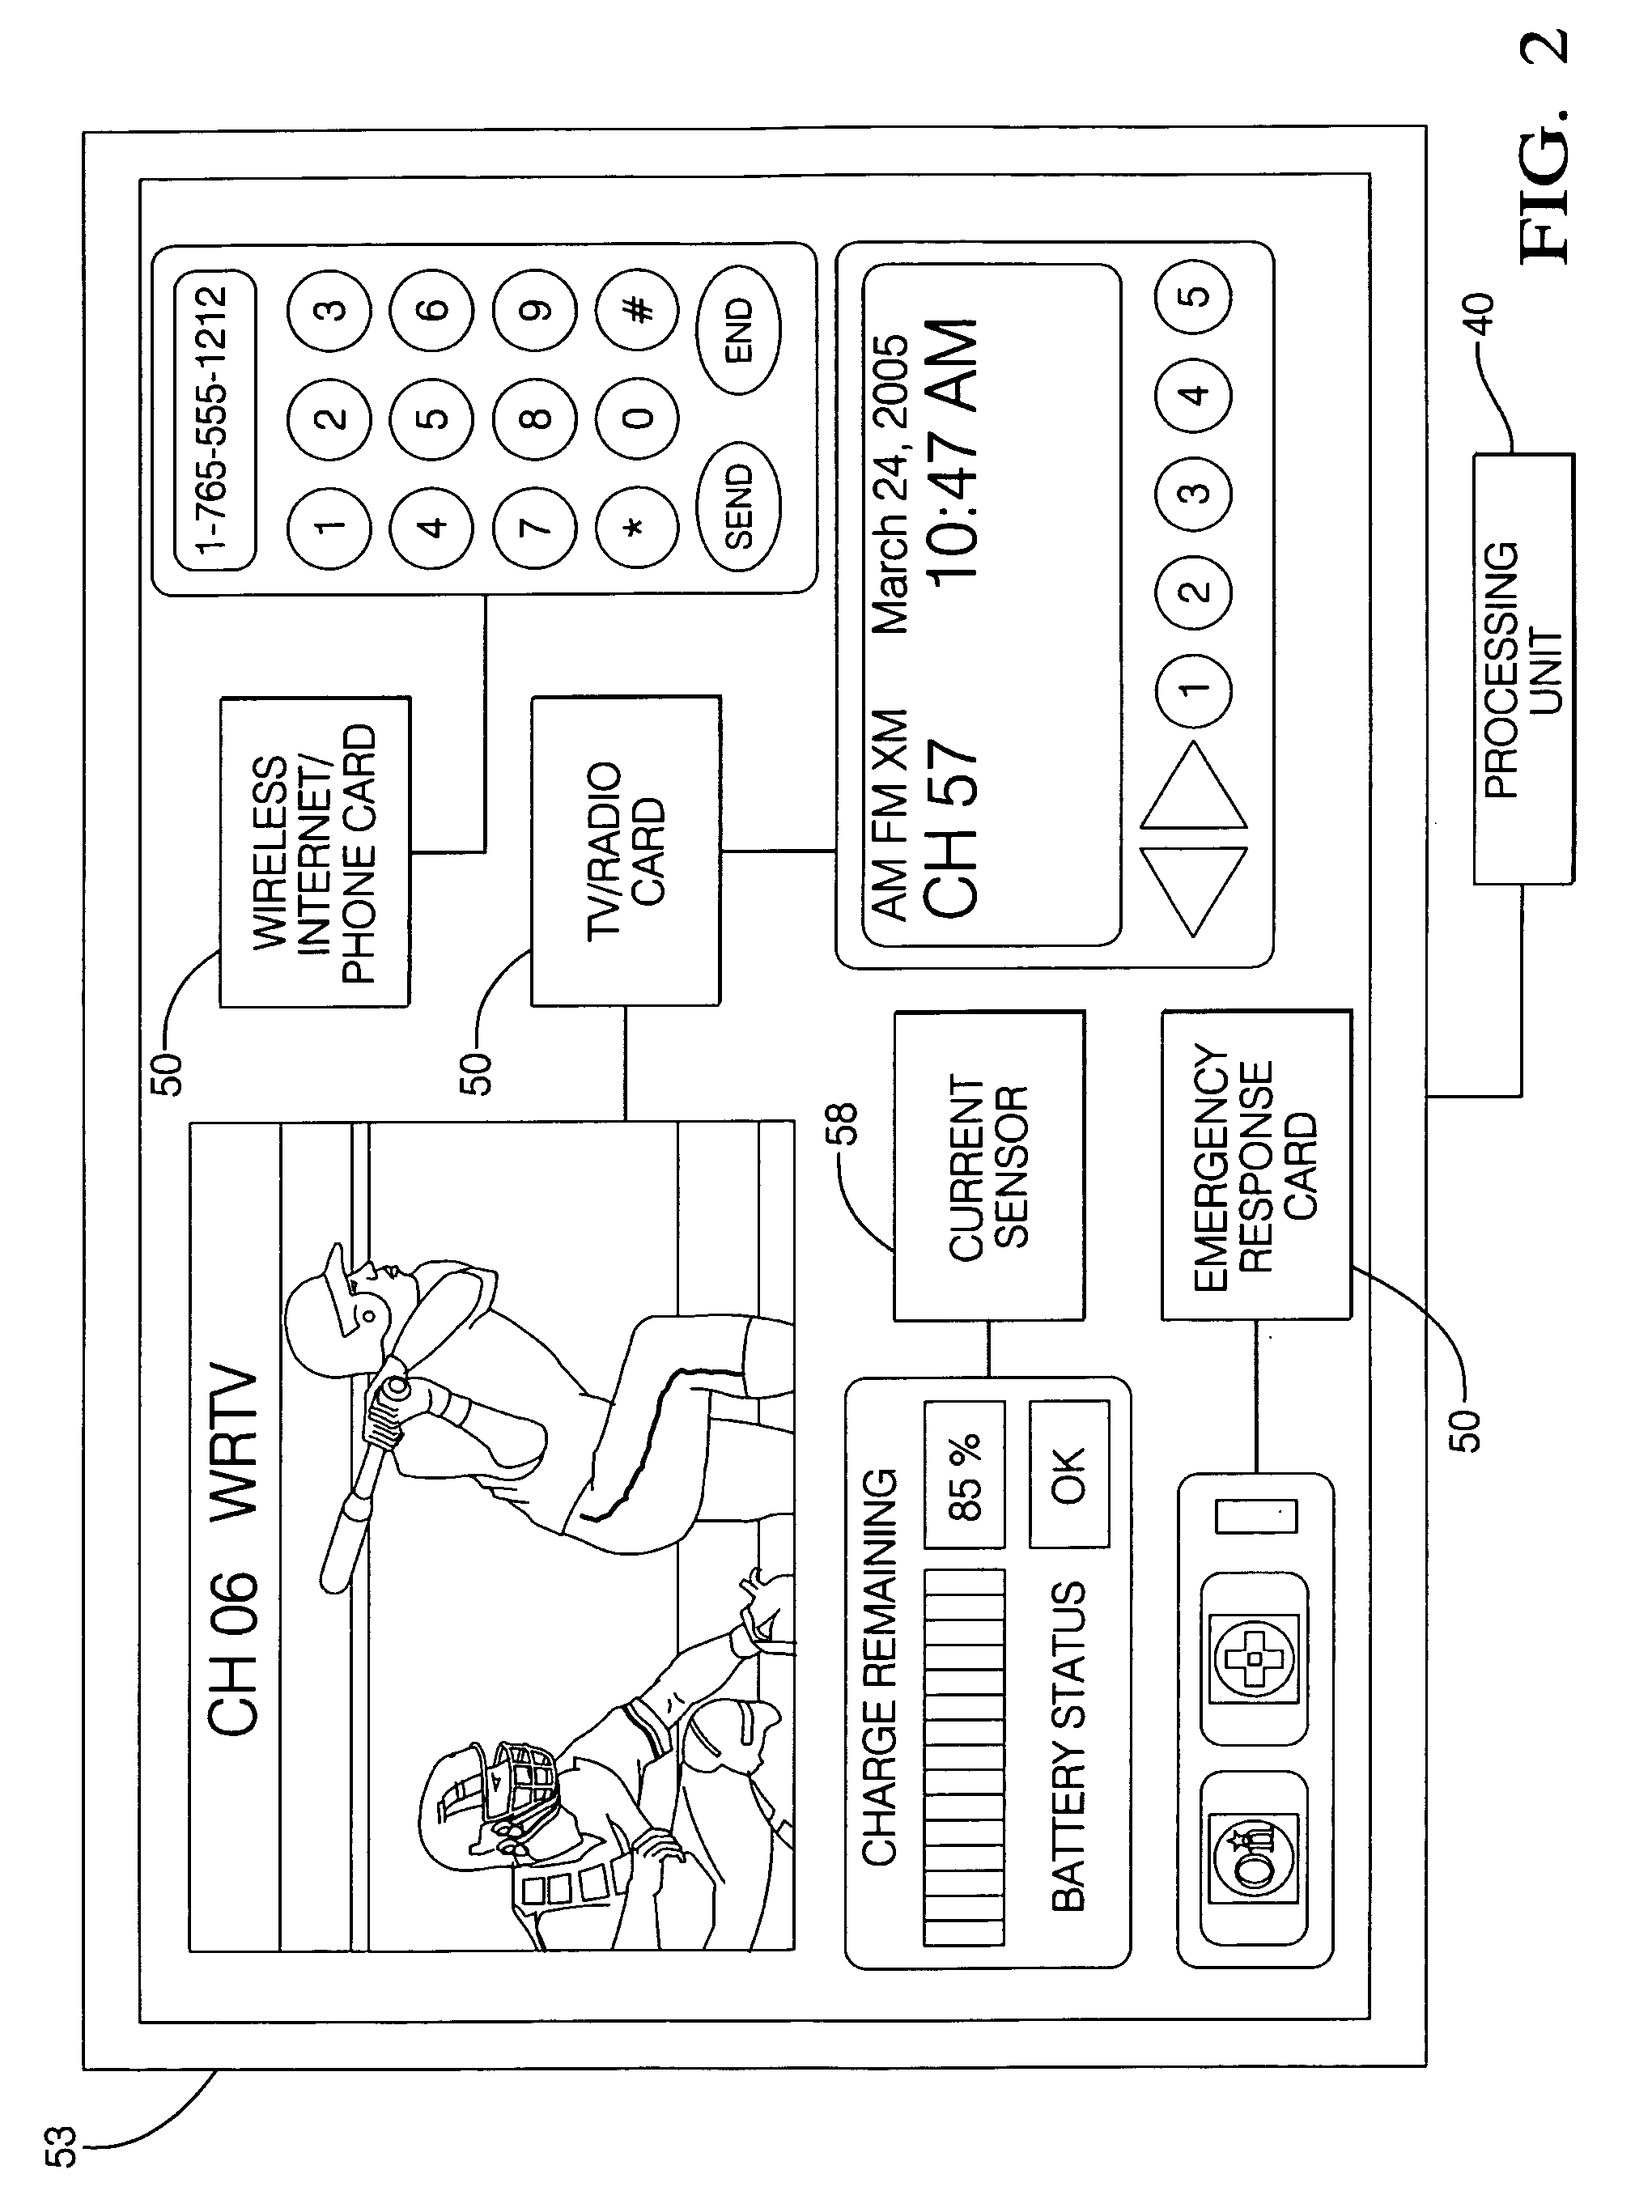 Personal mobility device with an incorporated safety and informational system